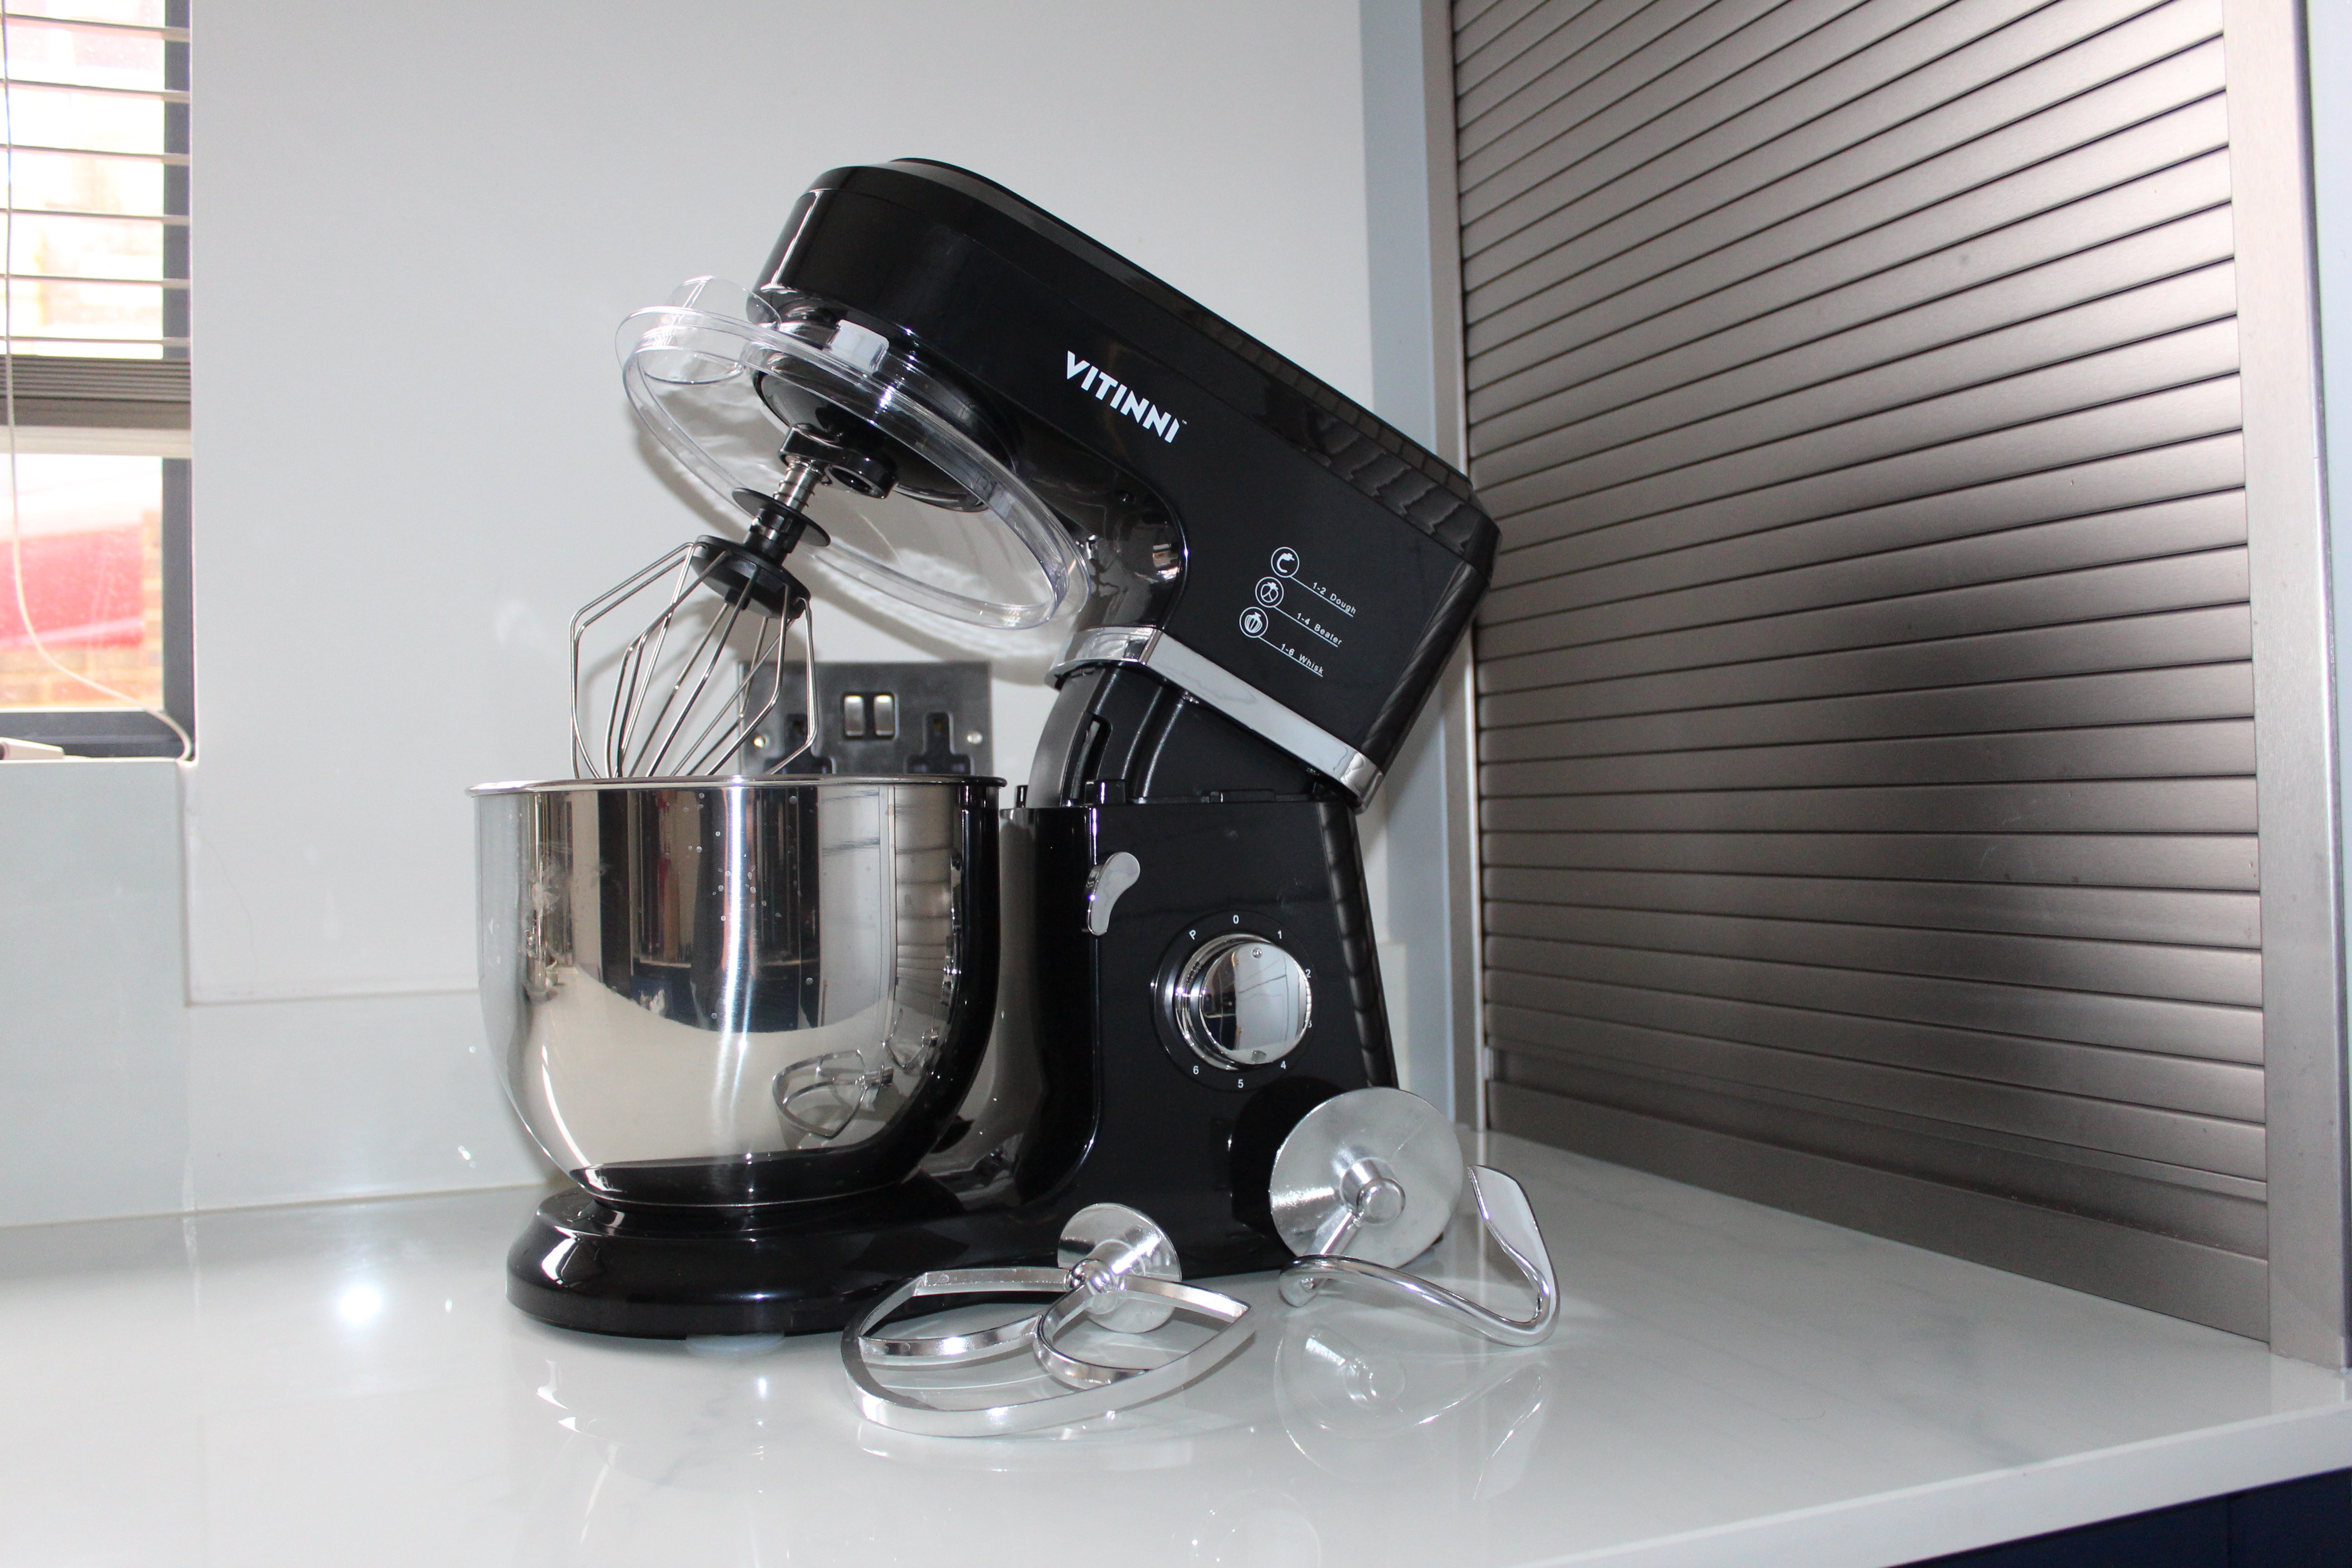 Vitinni 800W Stand Mixer with accessories on kitchen counter.